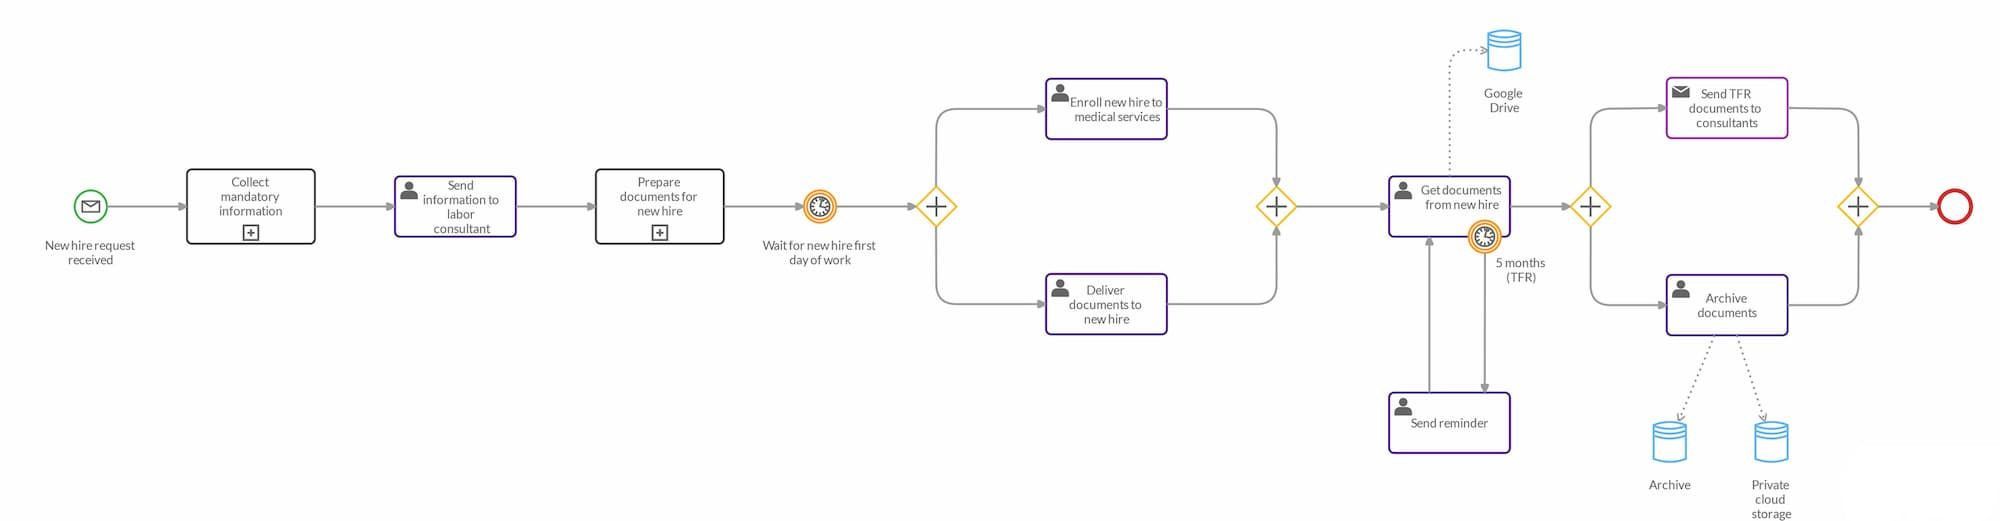 A bpmn workflow drawn with Cardanit that illustrates the onboarding process of new employees